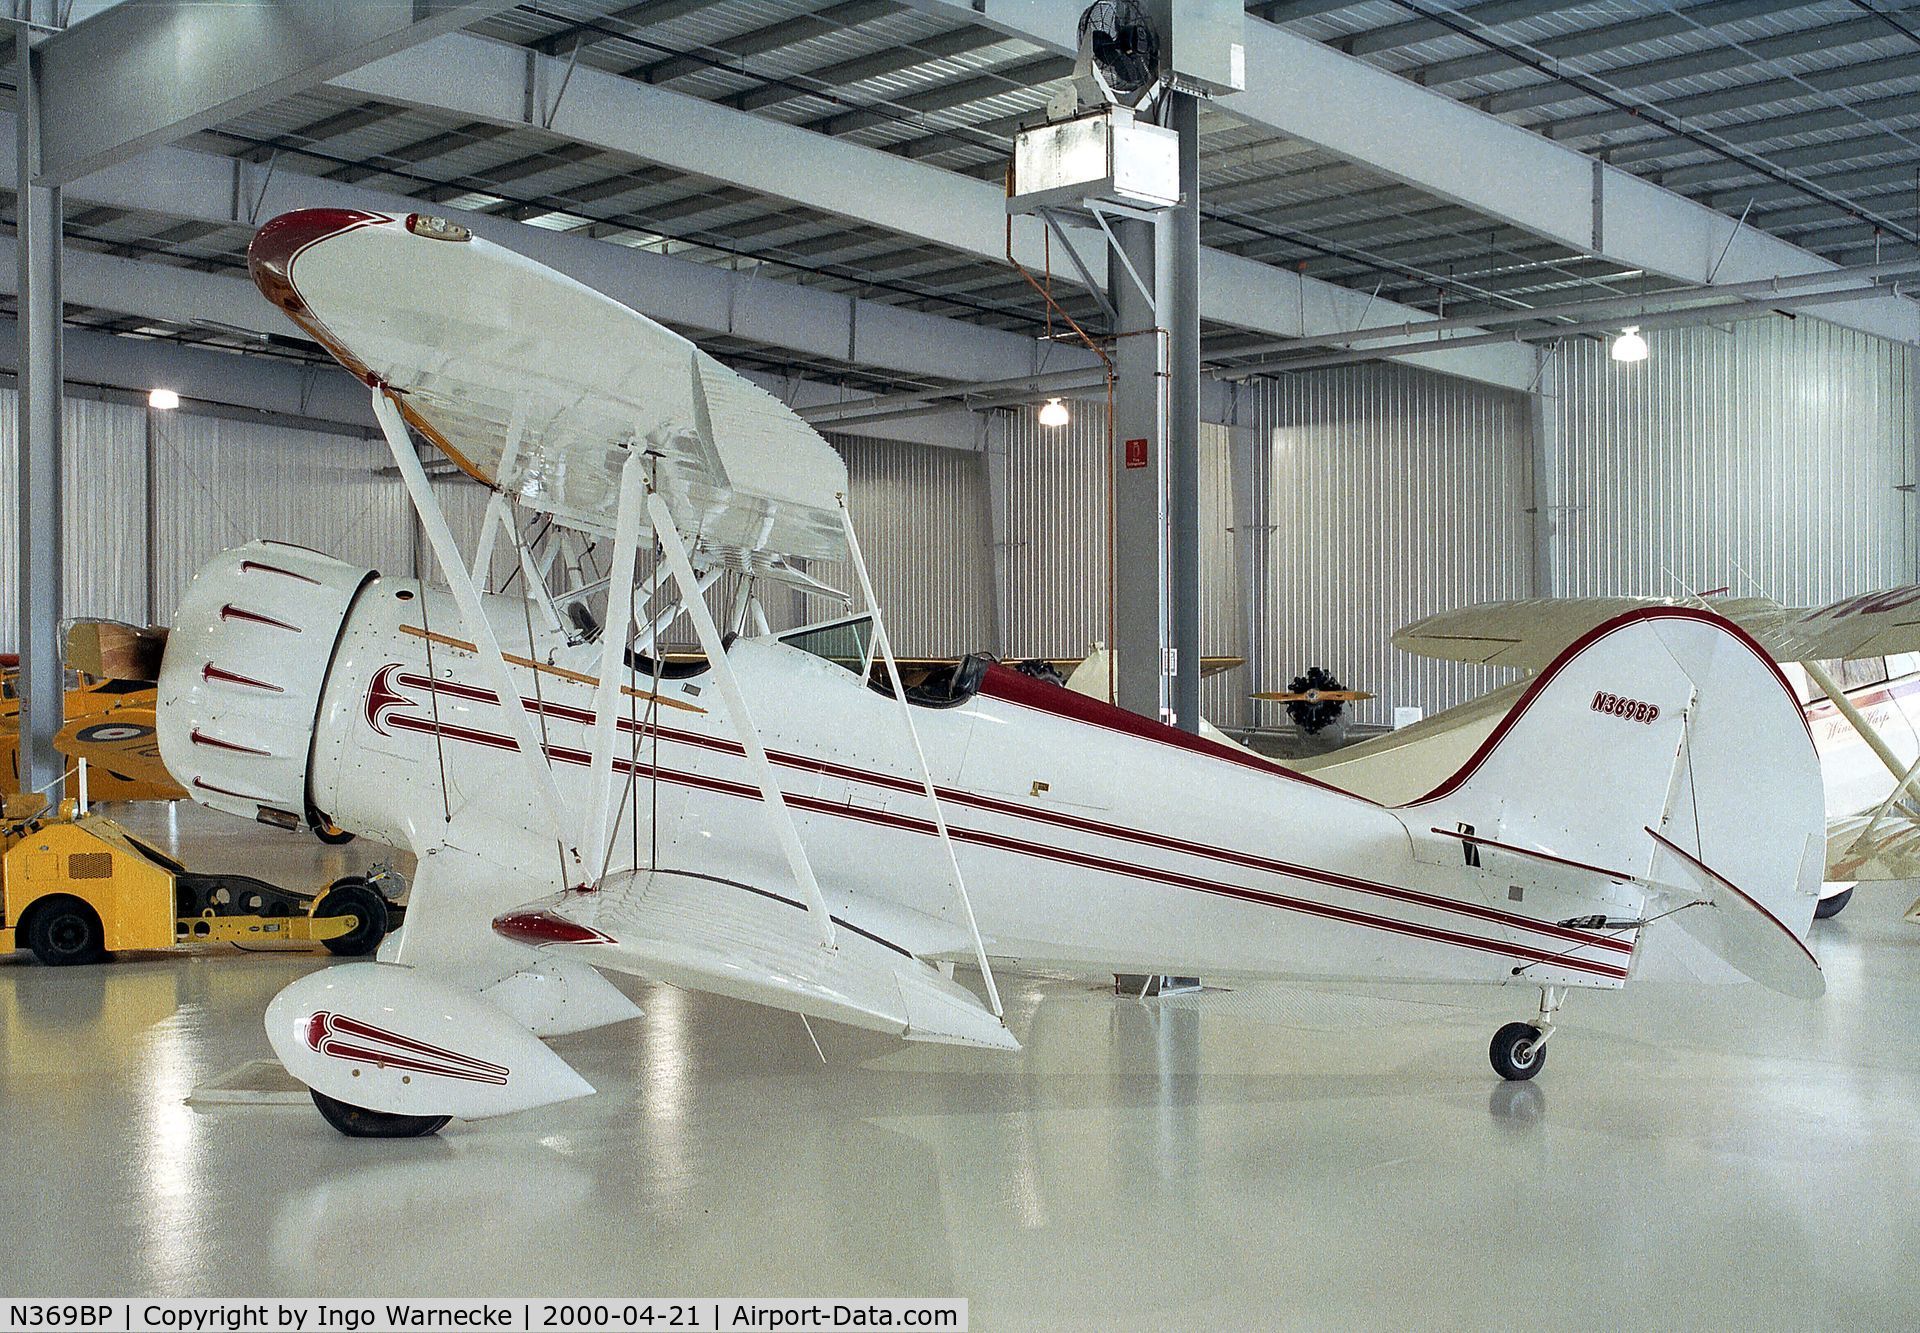 N369BP, 1987 Classic Aircraft Corp WACO YMF C/N F5-005, Classiv Aircraft Waco YMF at the Golden Wings Flying Museum, Blaine MN